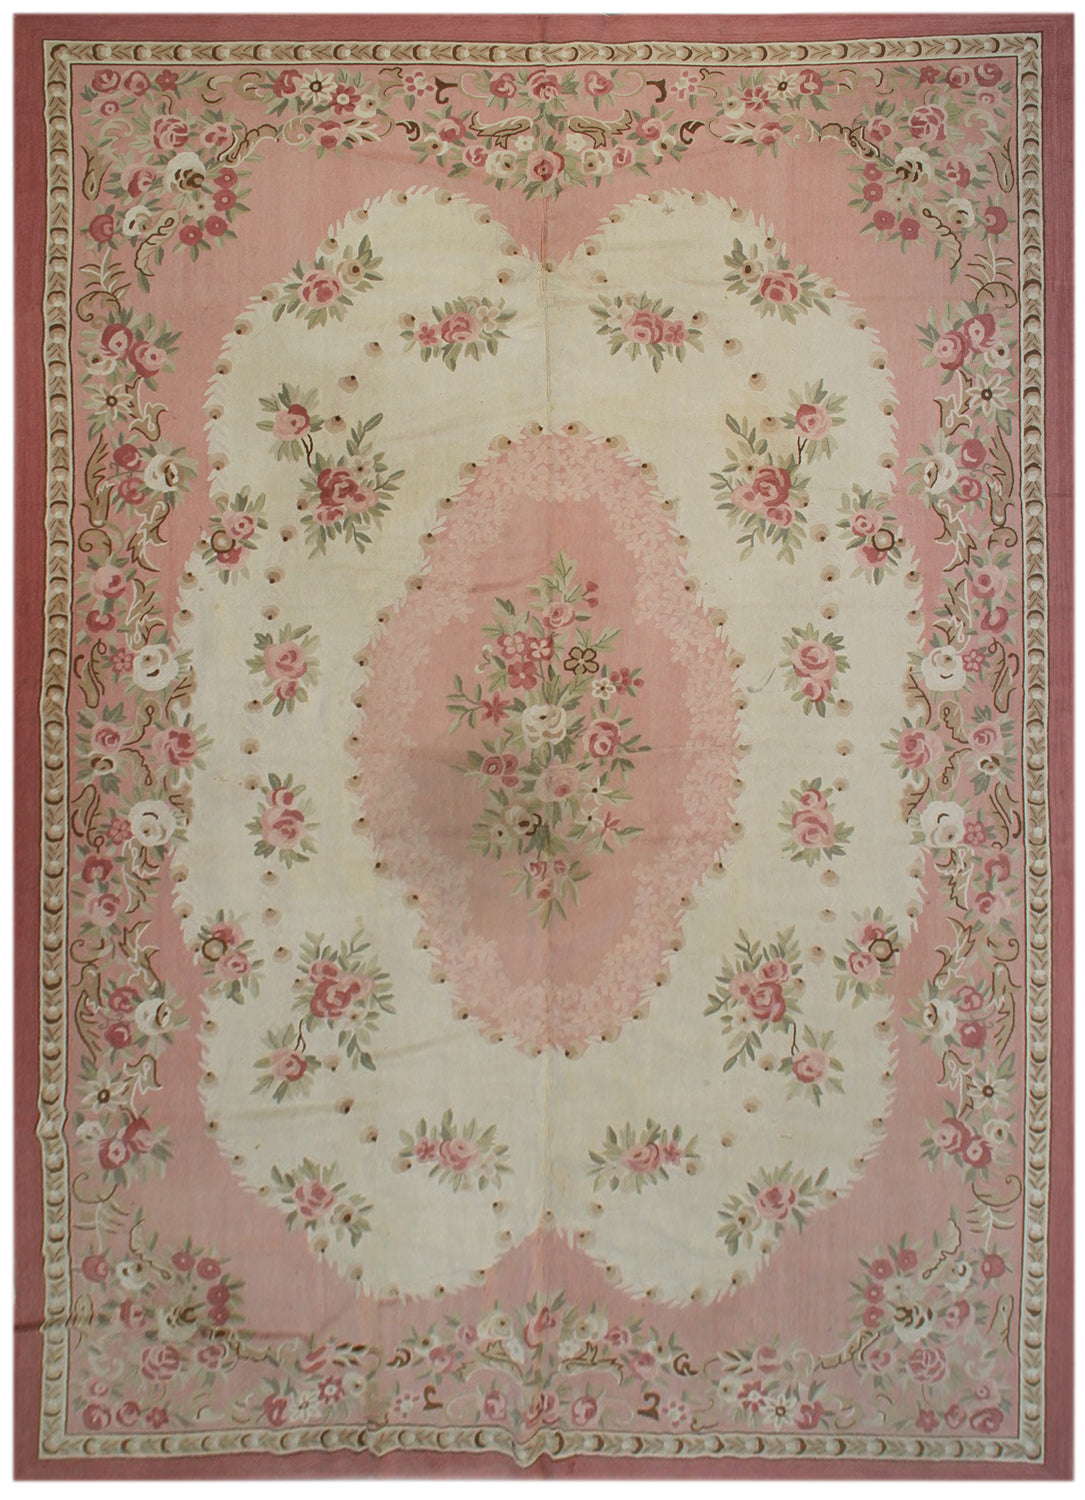 12x18 Vintage Pink and Ivory French Aubusson Savonnerie Design Hooked area Carpet